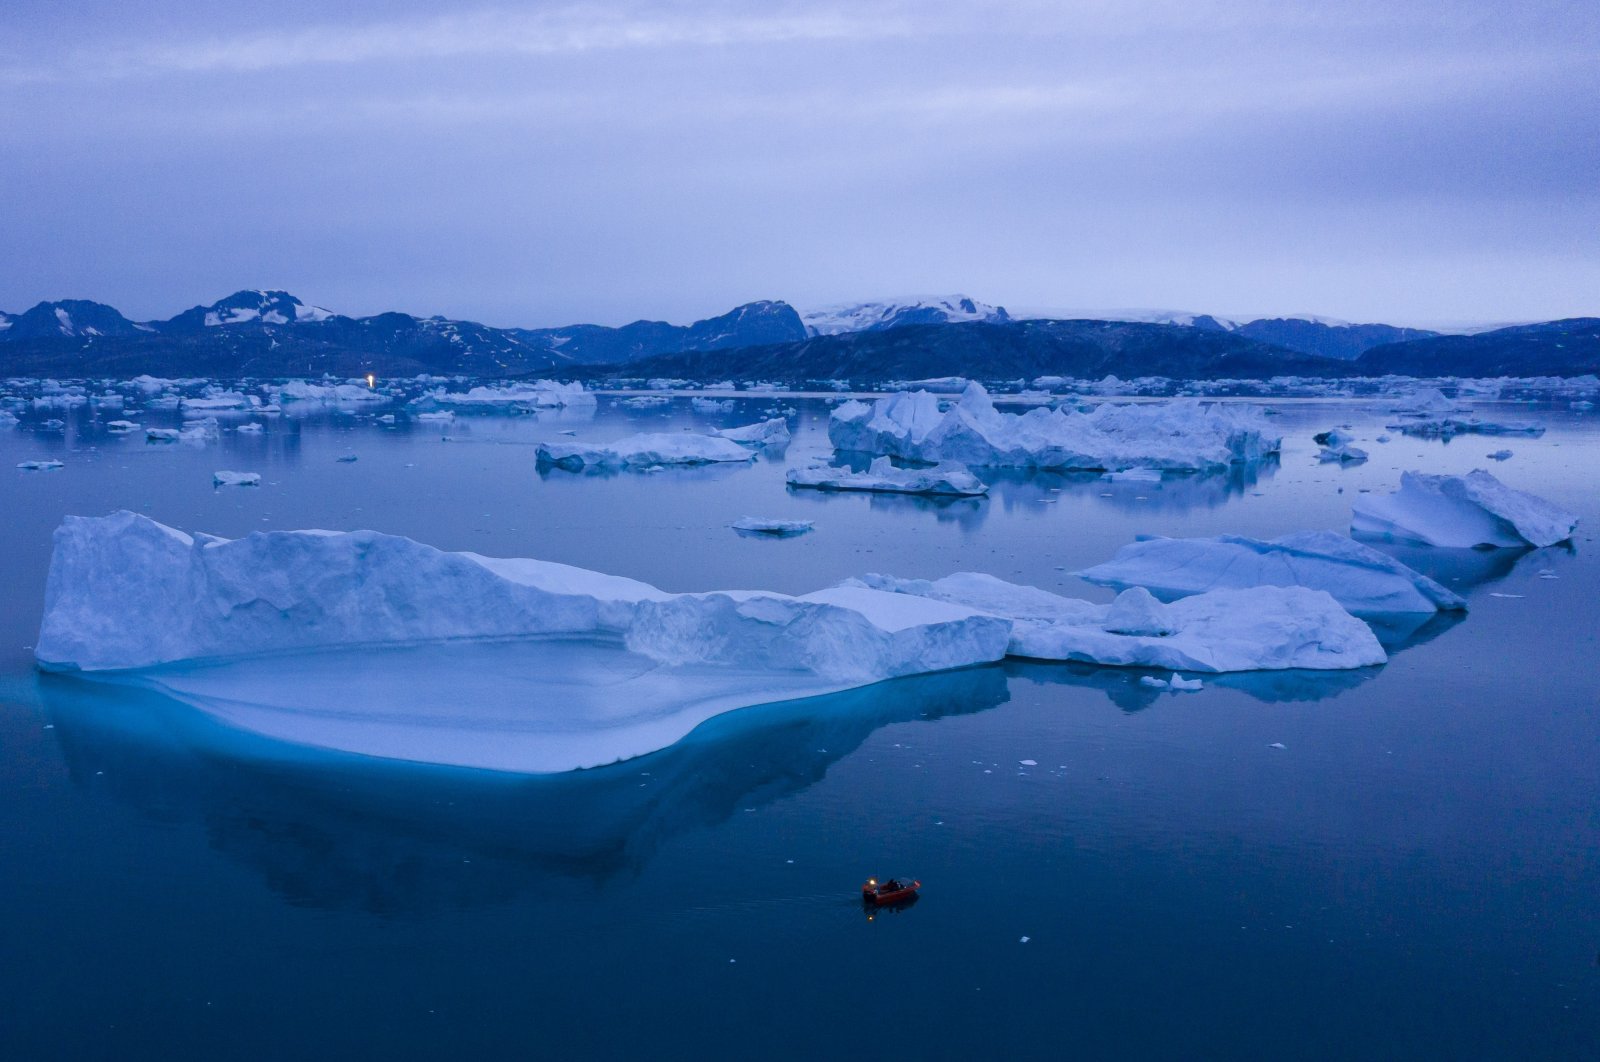 A boat navigates at night next to large icebergs near the town of Kulusuk, in eastern Greenland, Aug. 15, 2019. (AP Photo)